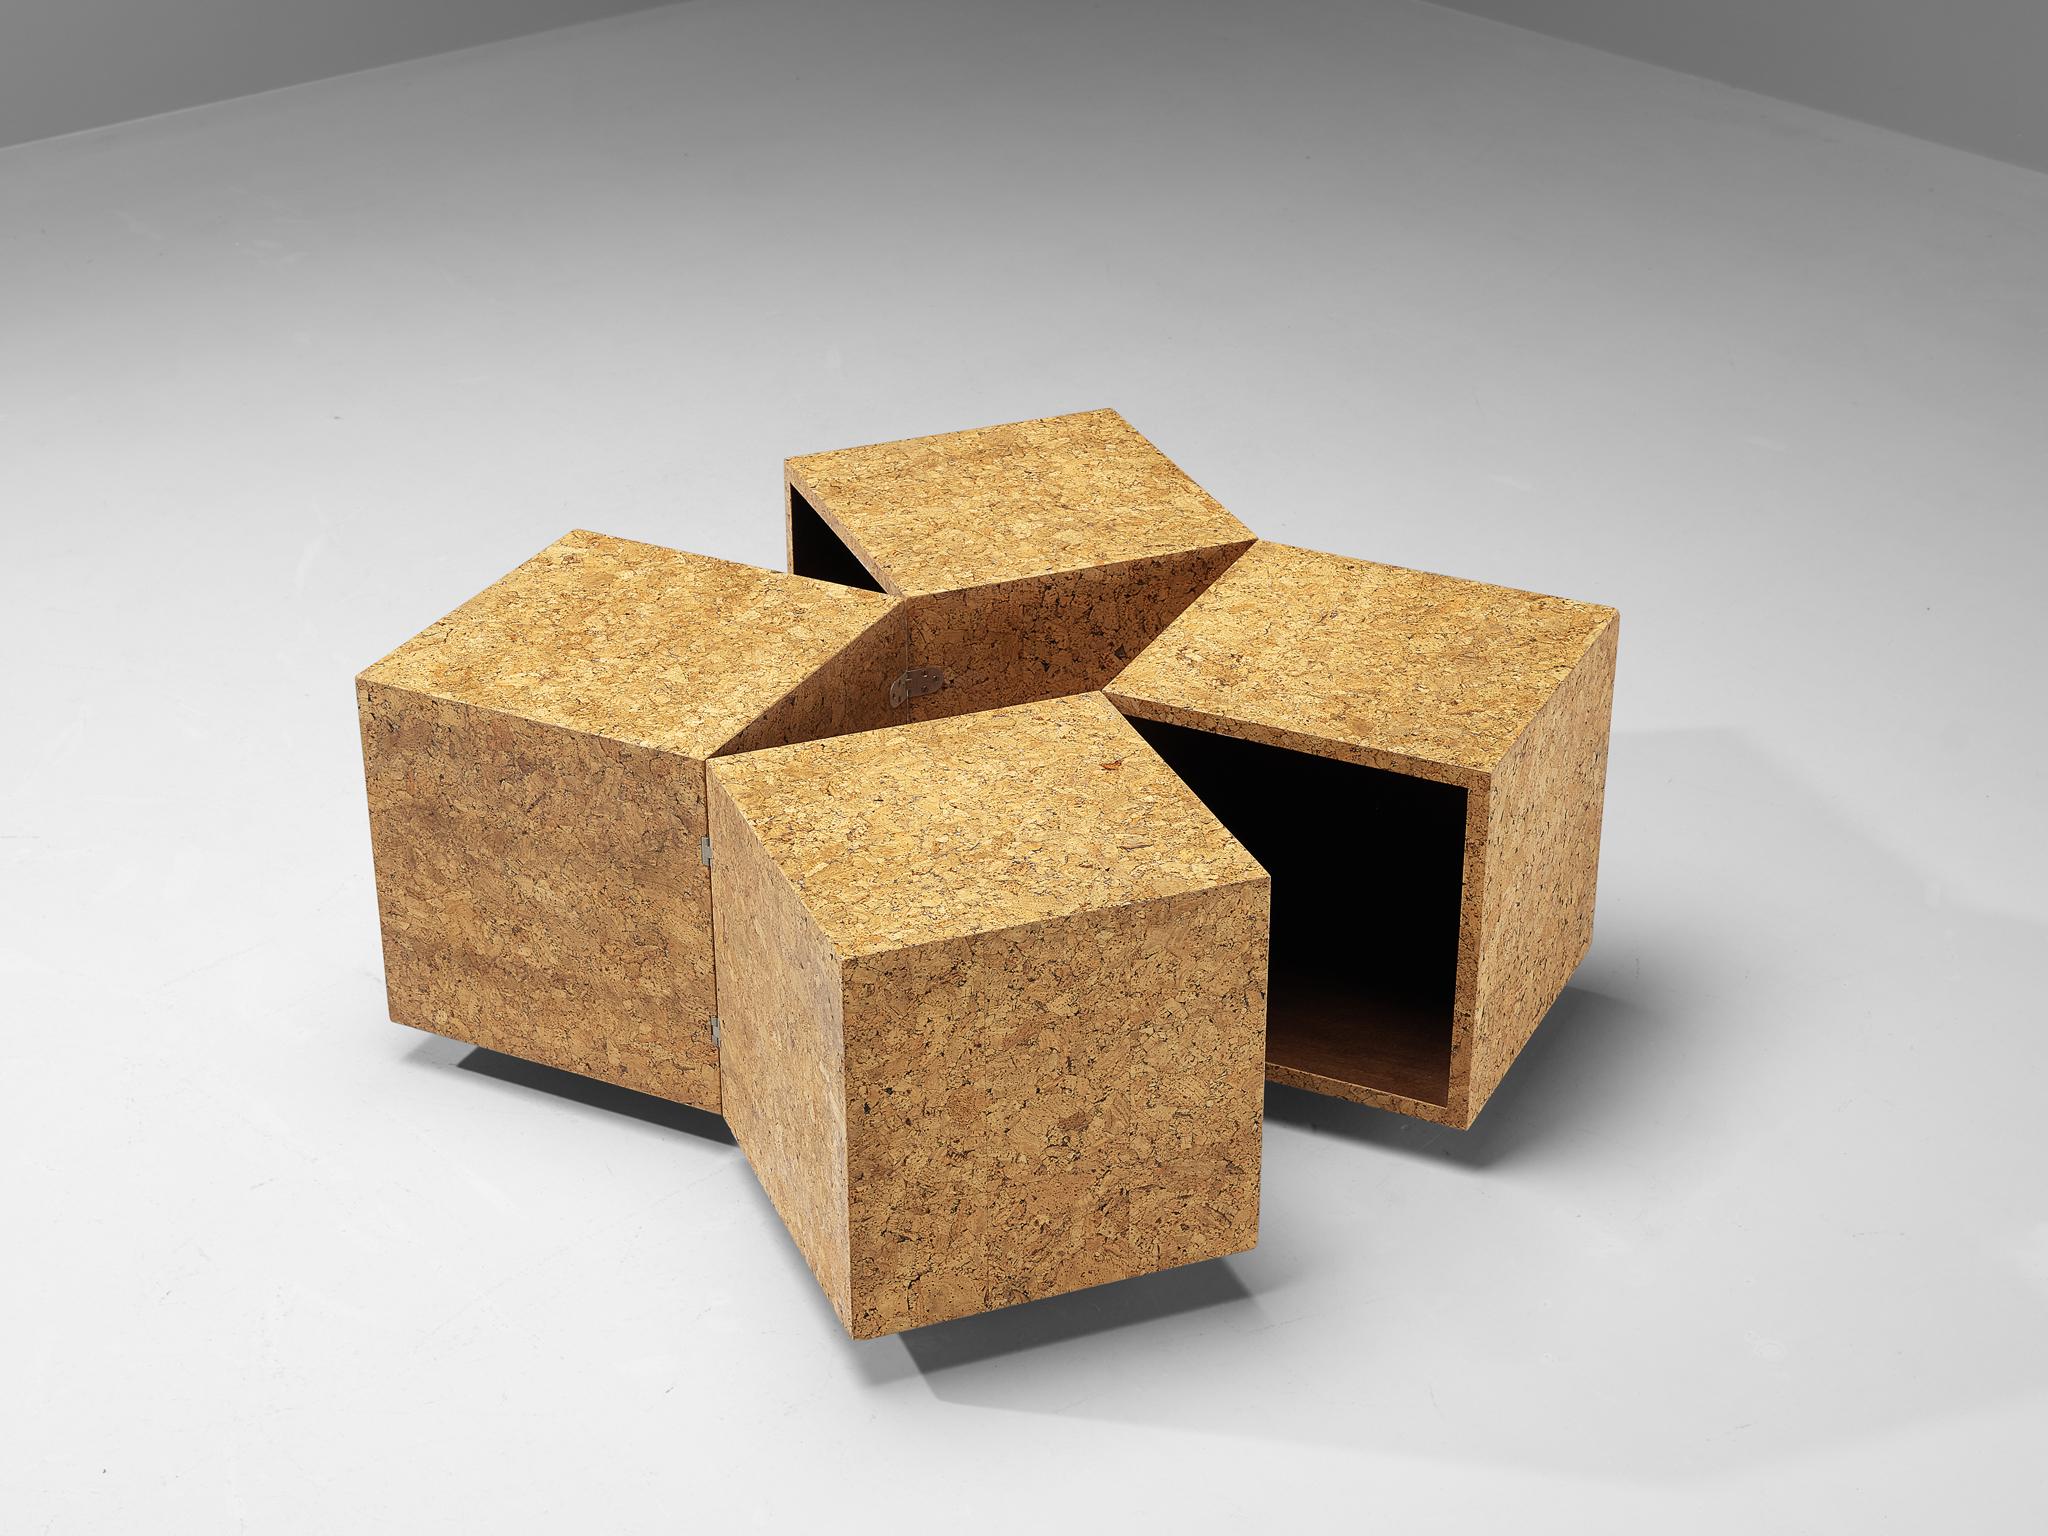 Transformable coffee or side table, cork, Europe, 1980s

This playful coffee or side table can easily be transformed into several functional shapes. It consists of four individual lacquered sections, linked to each other with metal connections. The